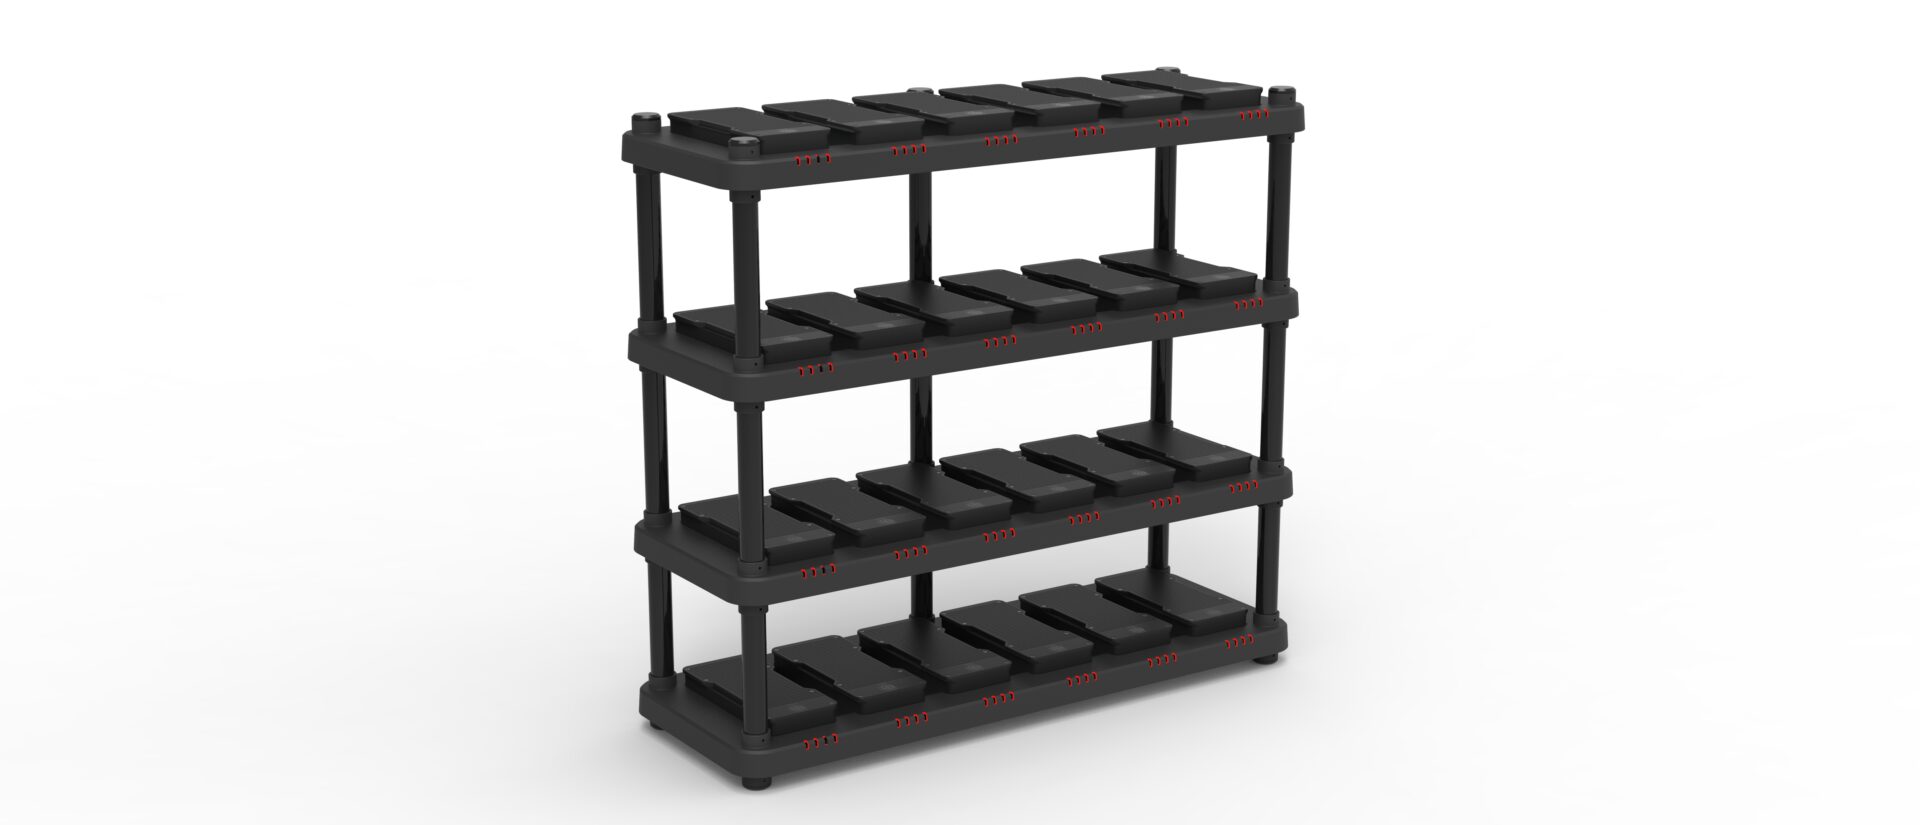 A black plastic shelf with four levels.